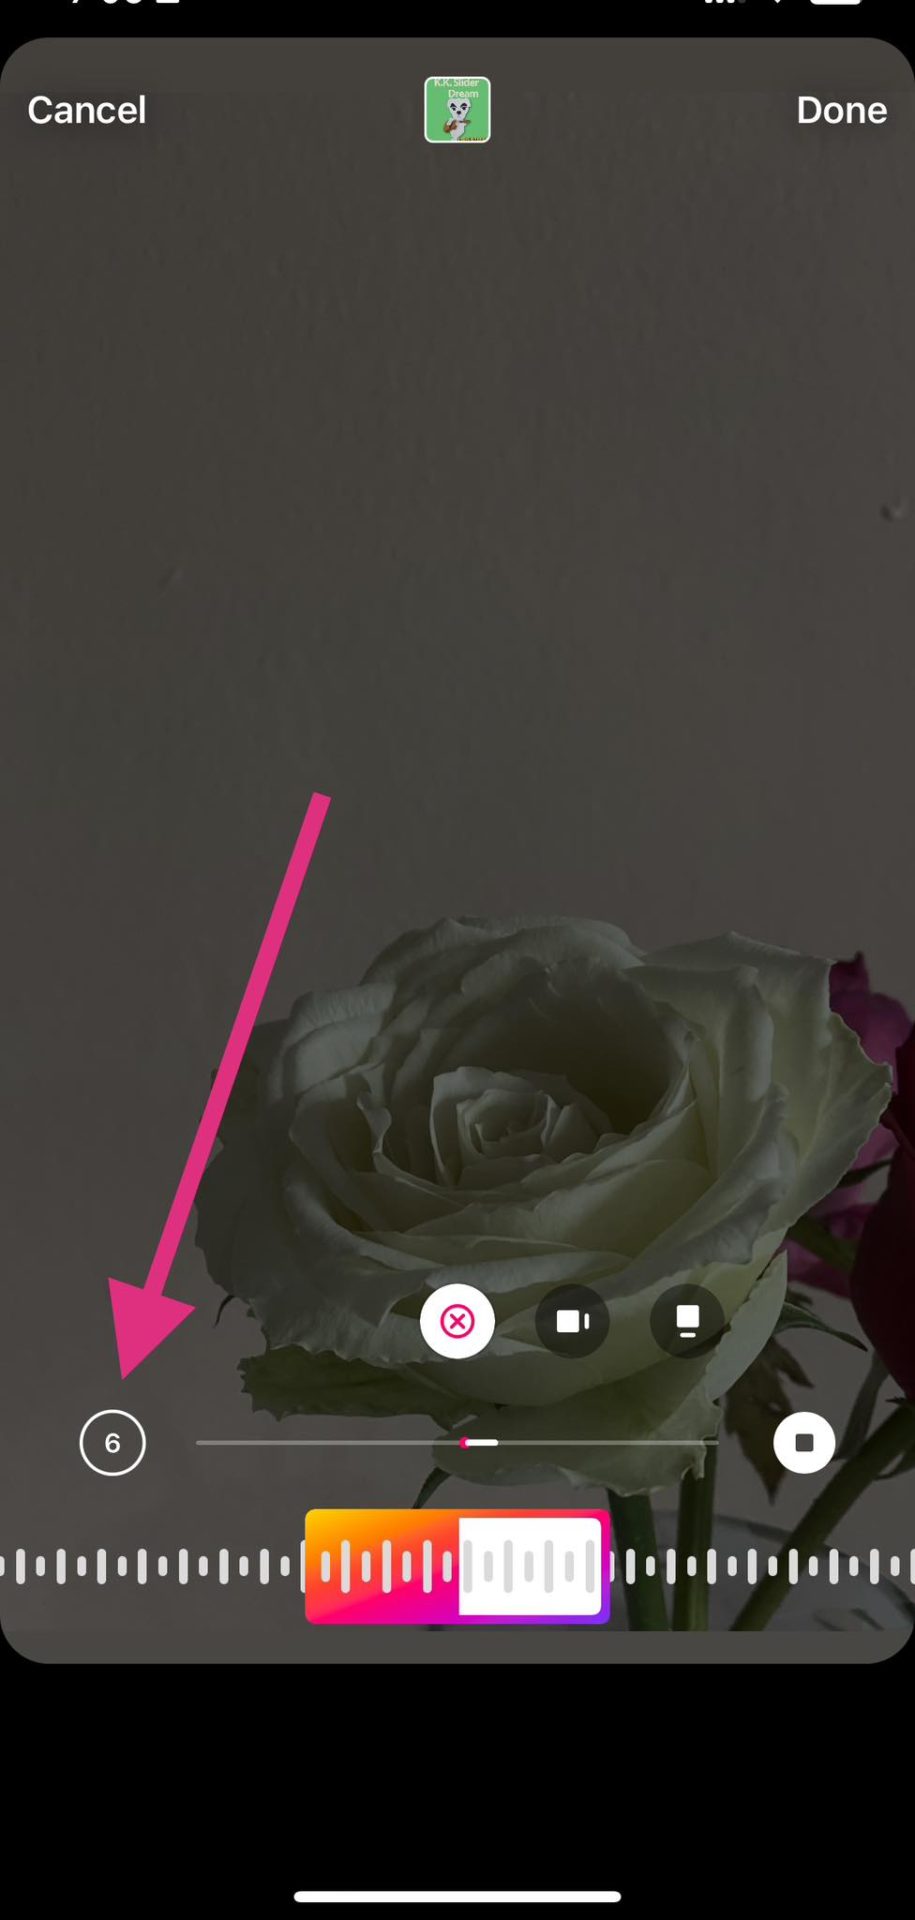 Instagram on phone - showing the number icon button